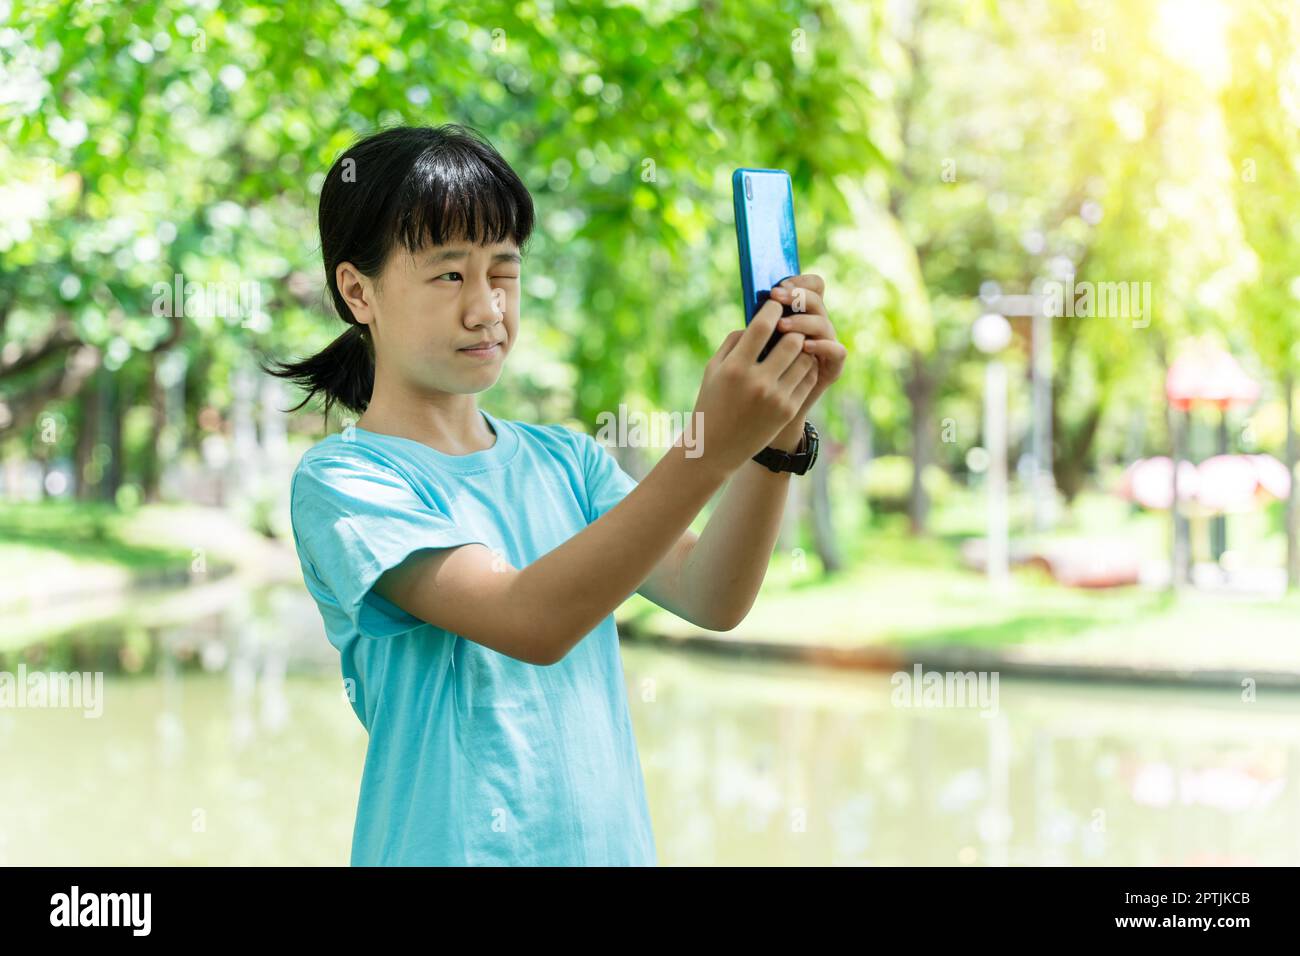 portrait of young asian child girl using mobile smartphone while in the park in warm spring day. Stock Photo